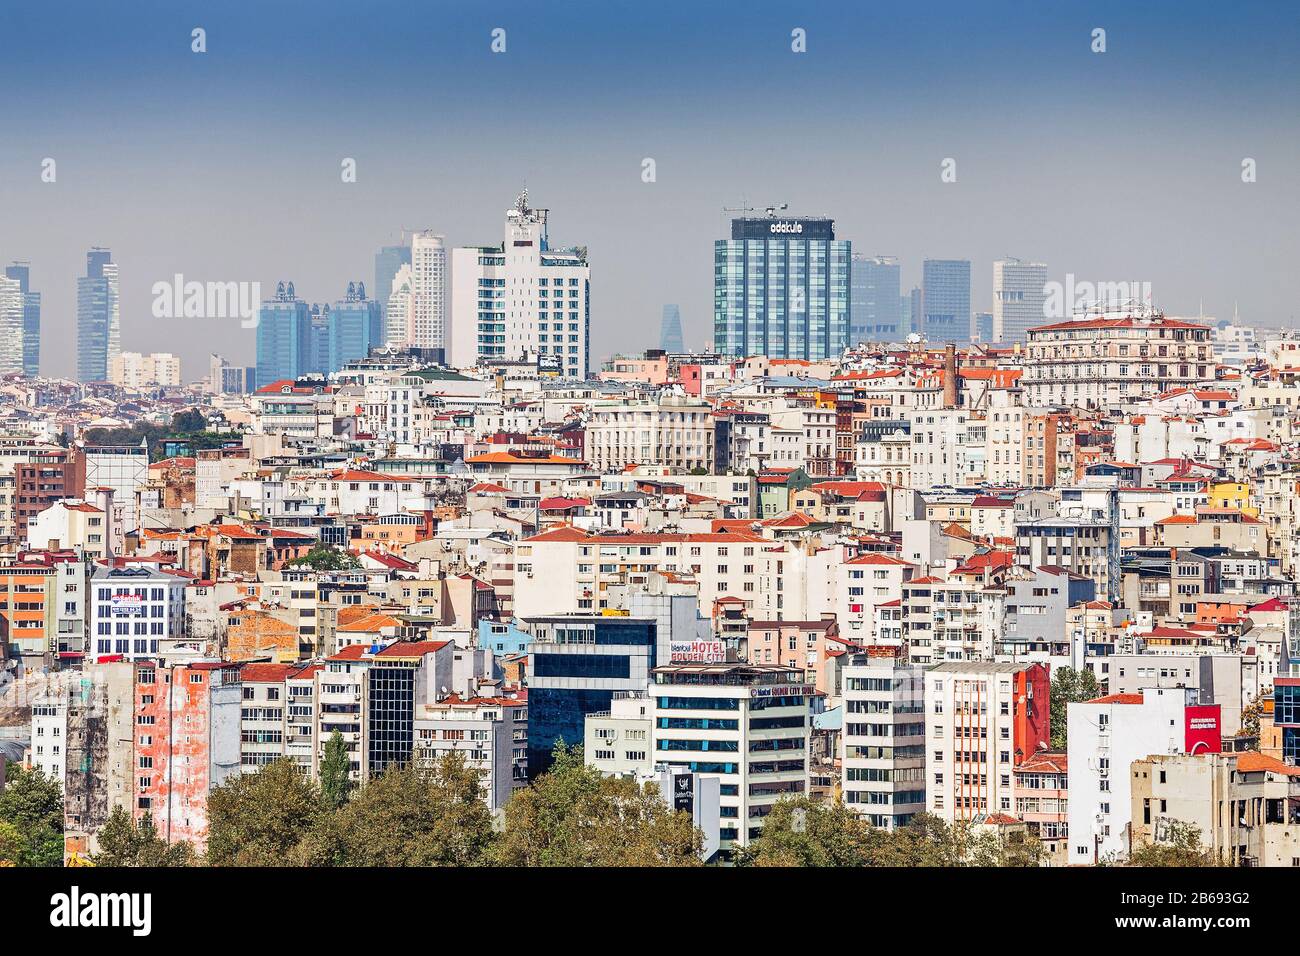 11 SEPTEMBER 2017, TURKEY, ISTANBUL: Cityscape with buildings and skyscrapers, zoom lens view Stock Photo